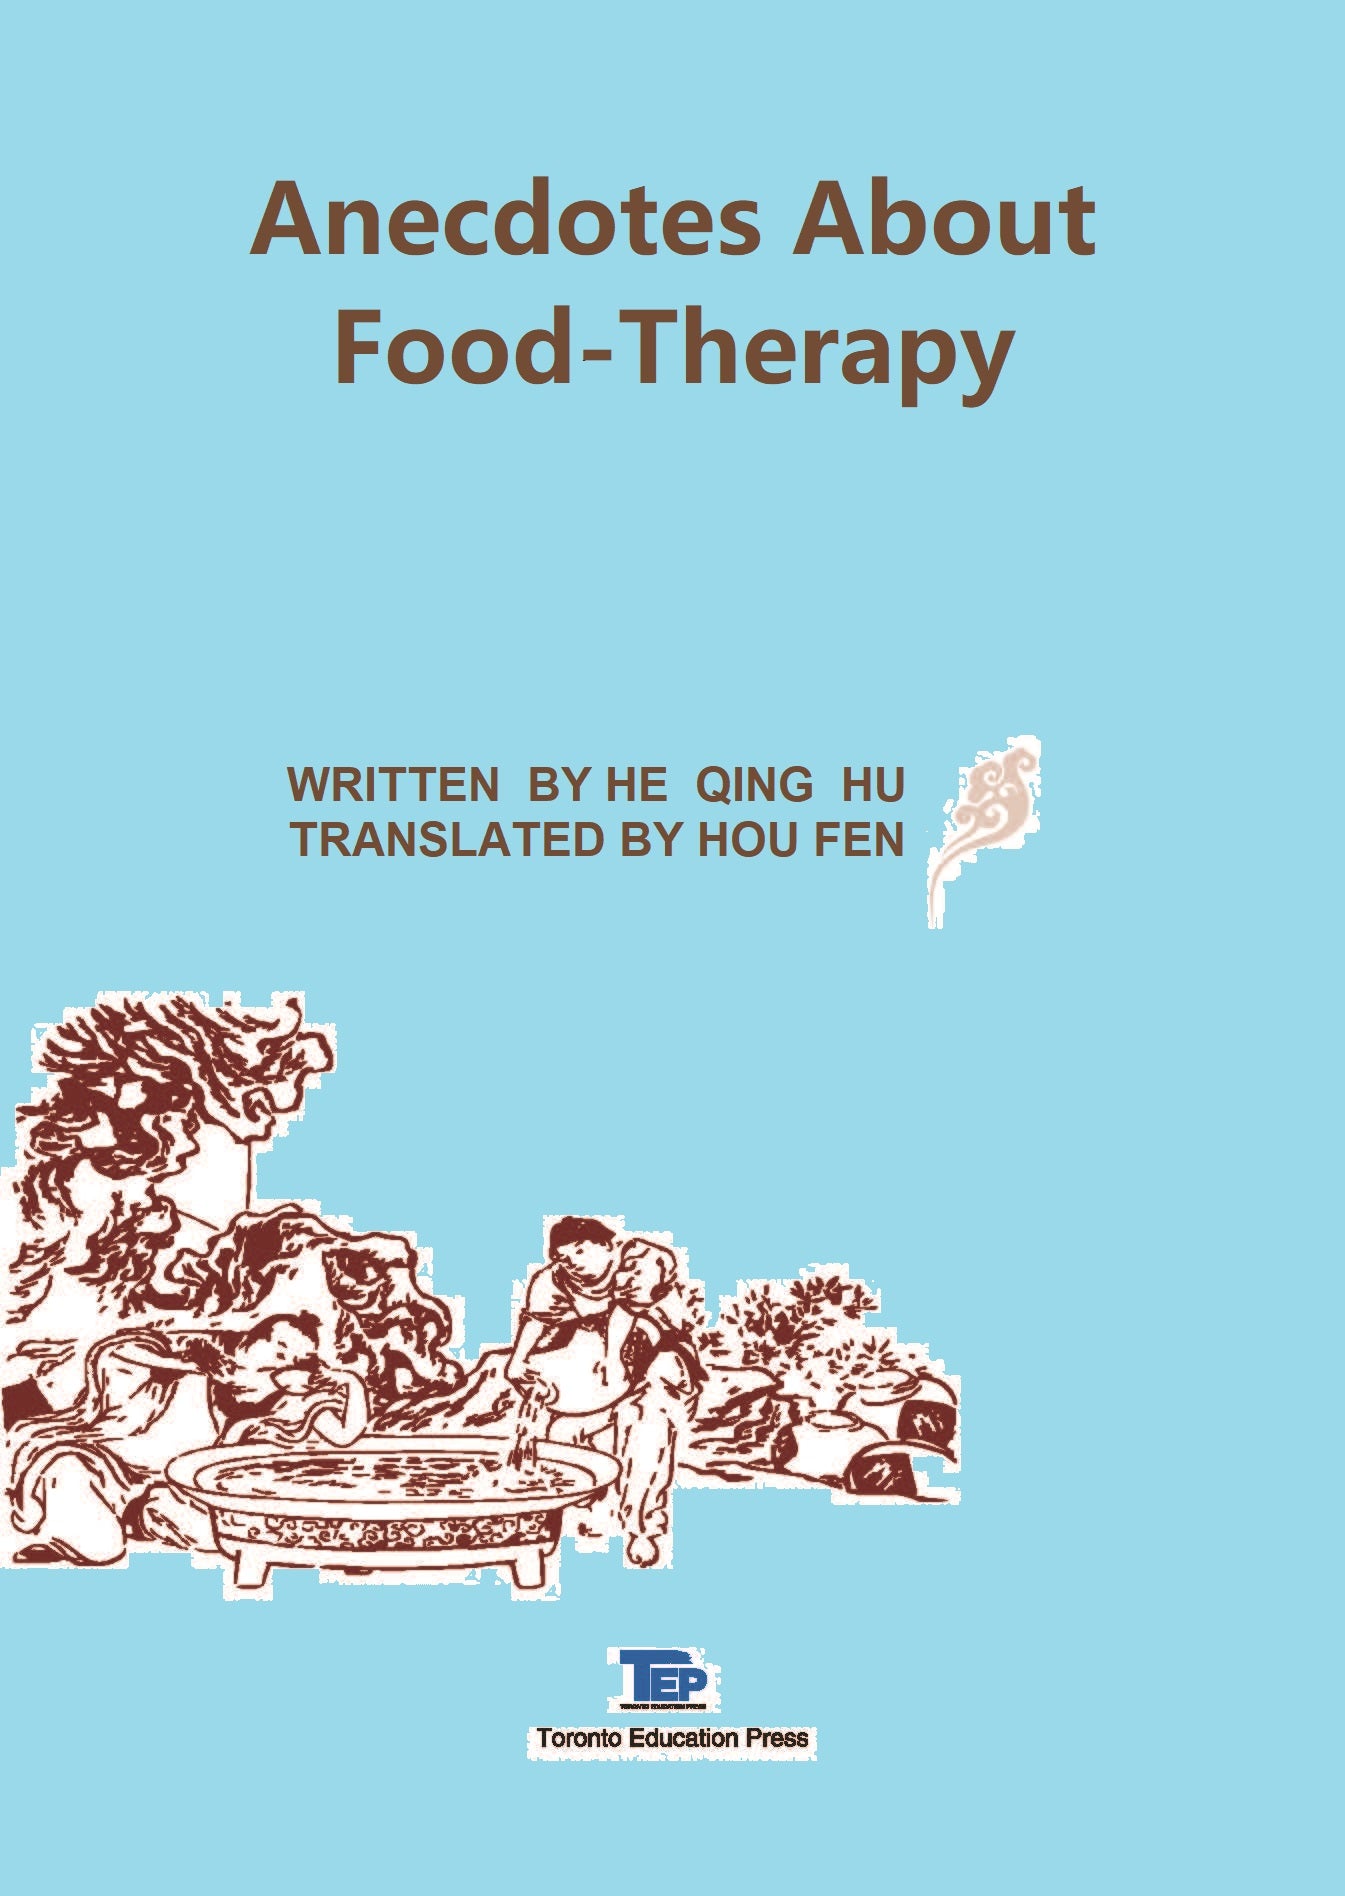 Anecdotes About Food-Therapy